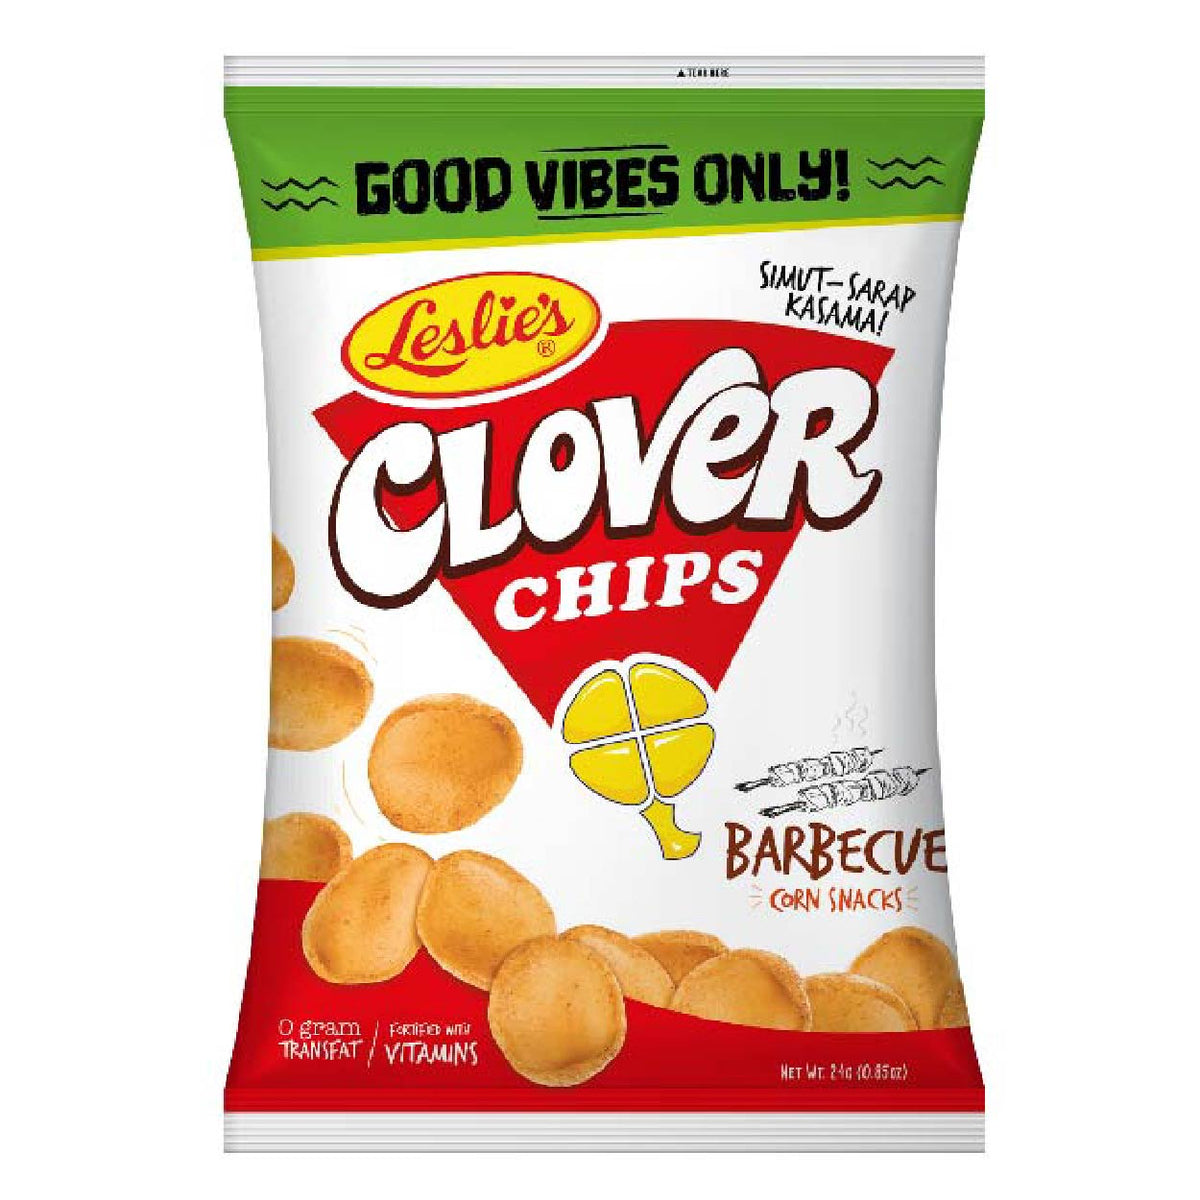 Corn　24g　Clover　Barbeque　Chips　Snacks